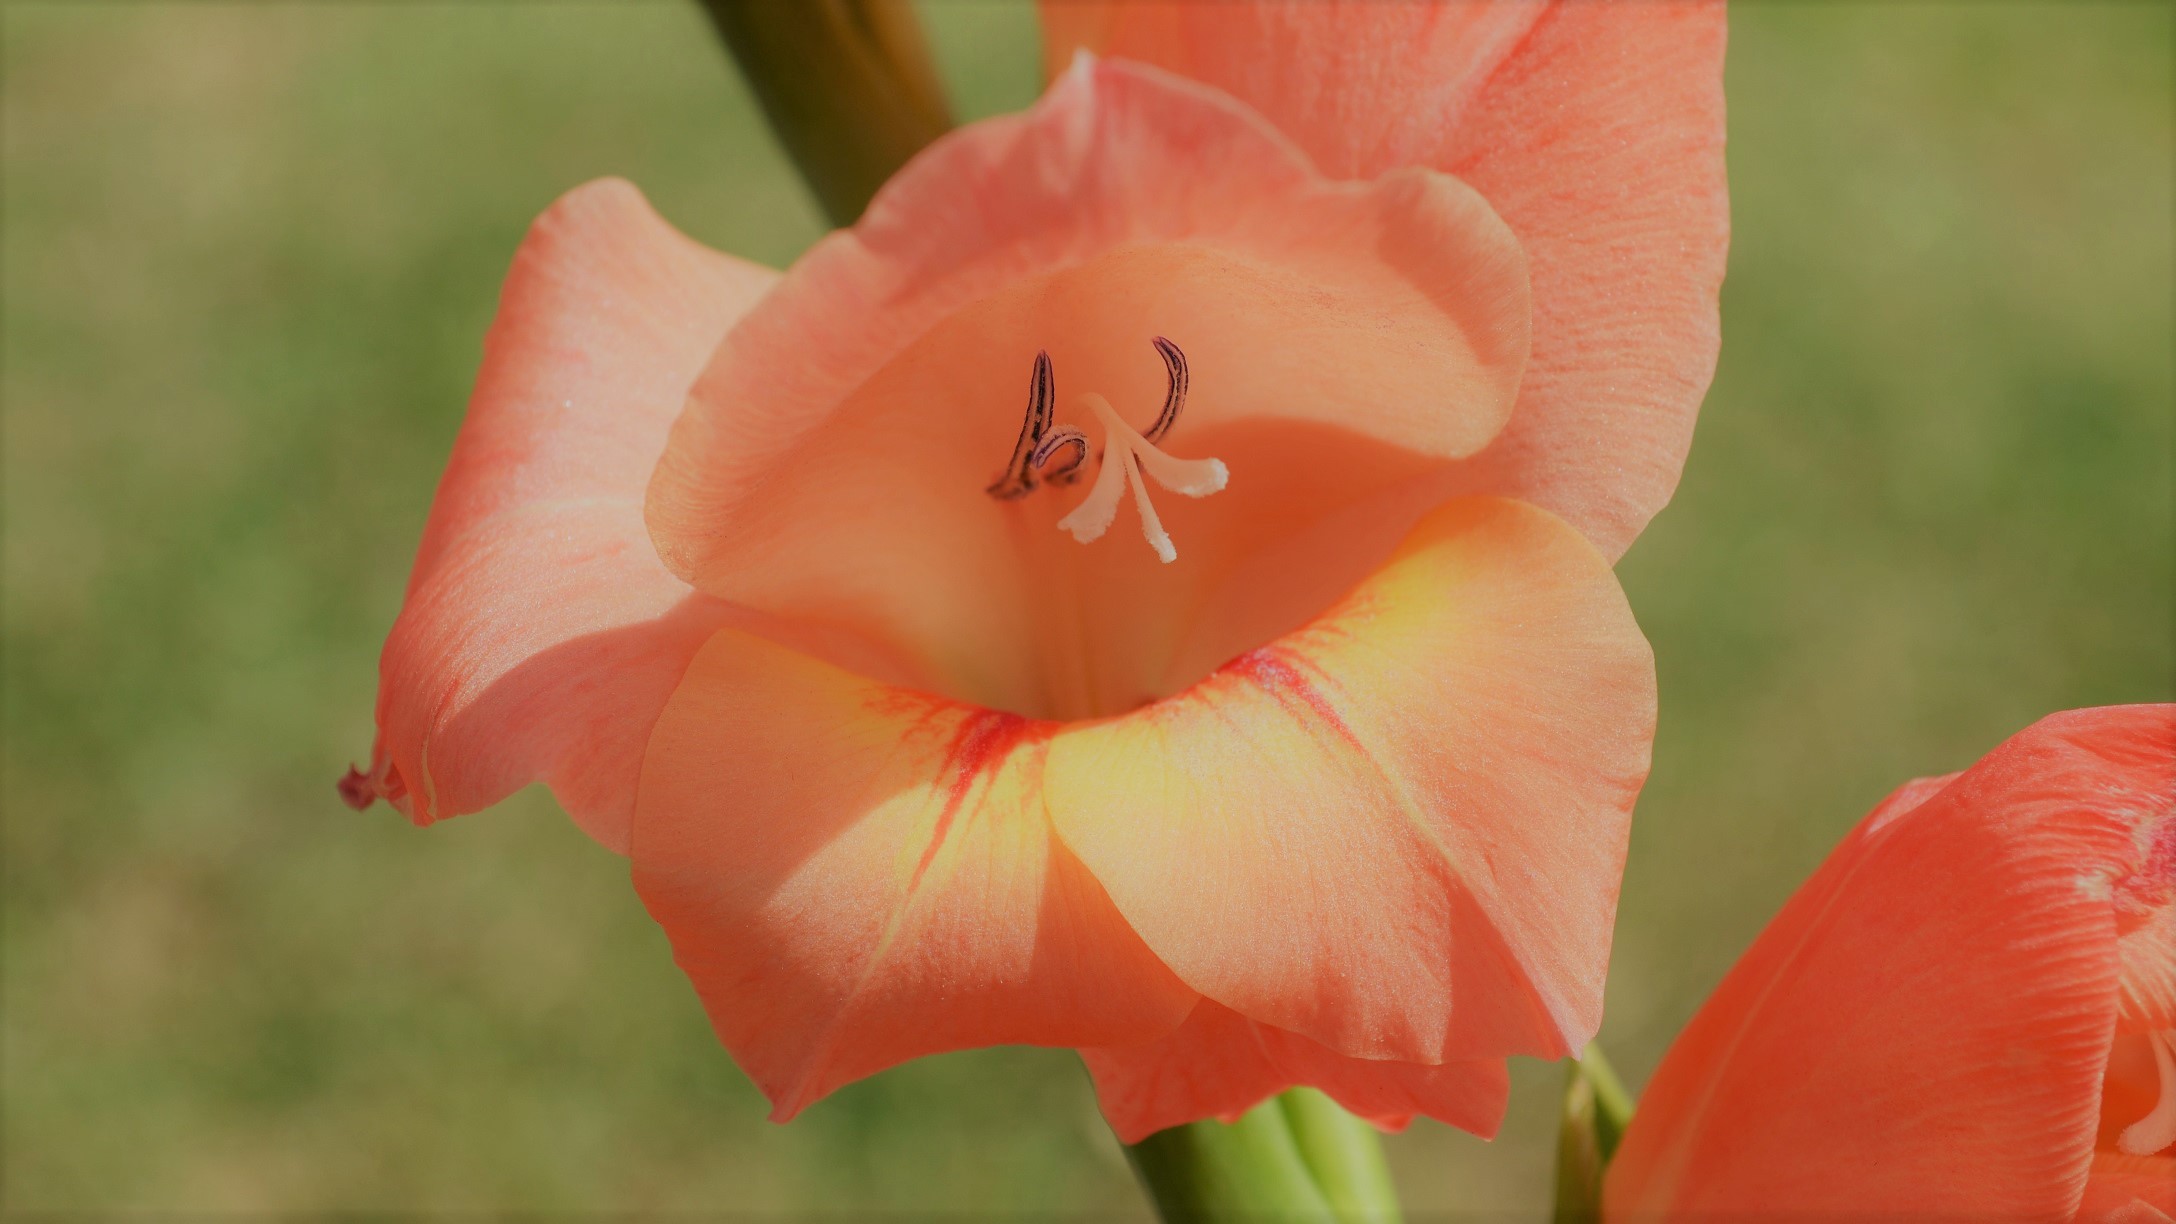 earth, gladiolus, close up, flower, nature, peach flower, flowers